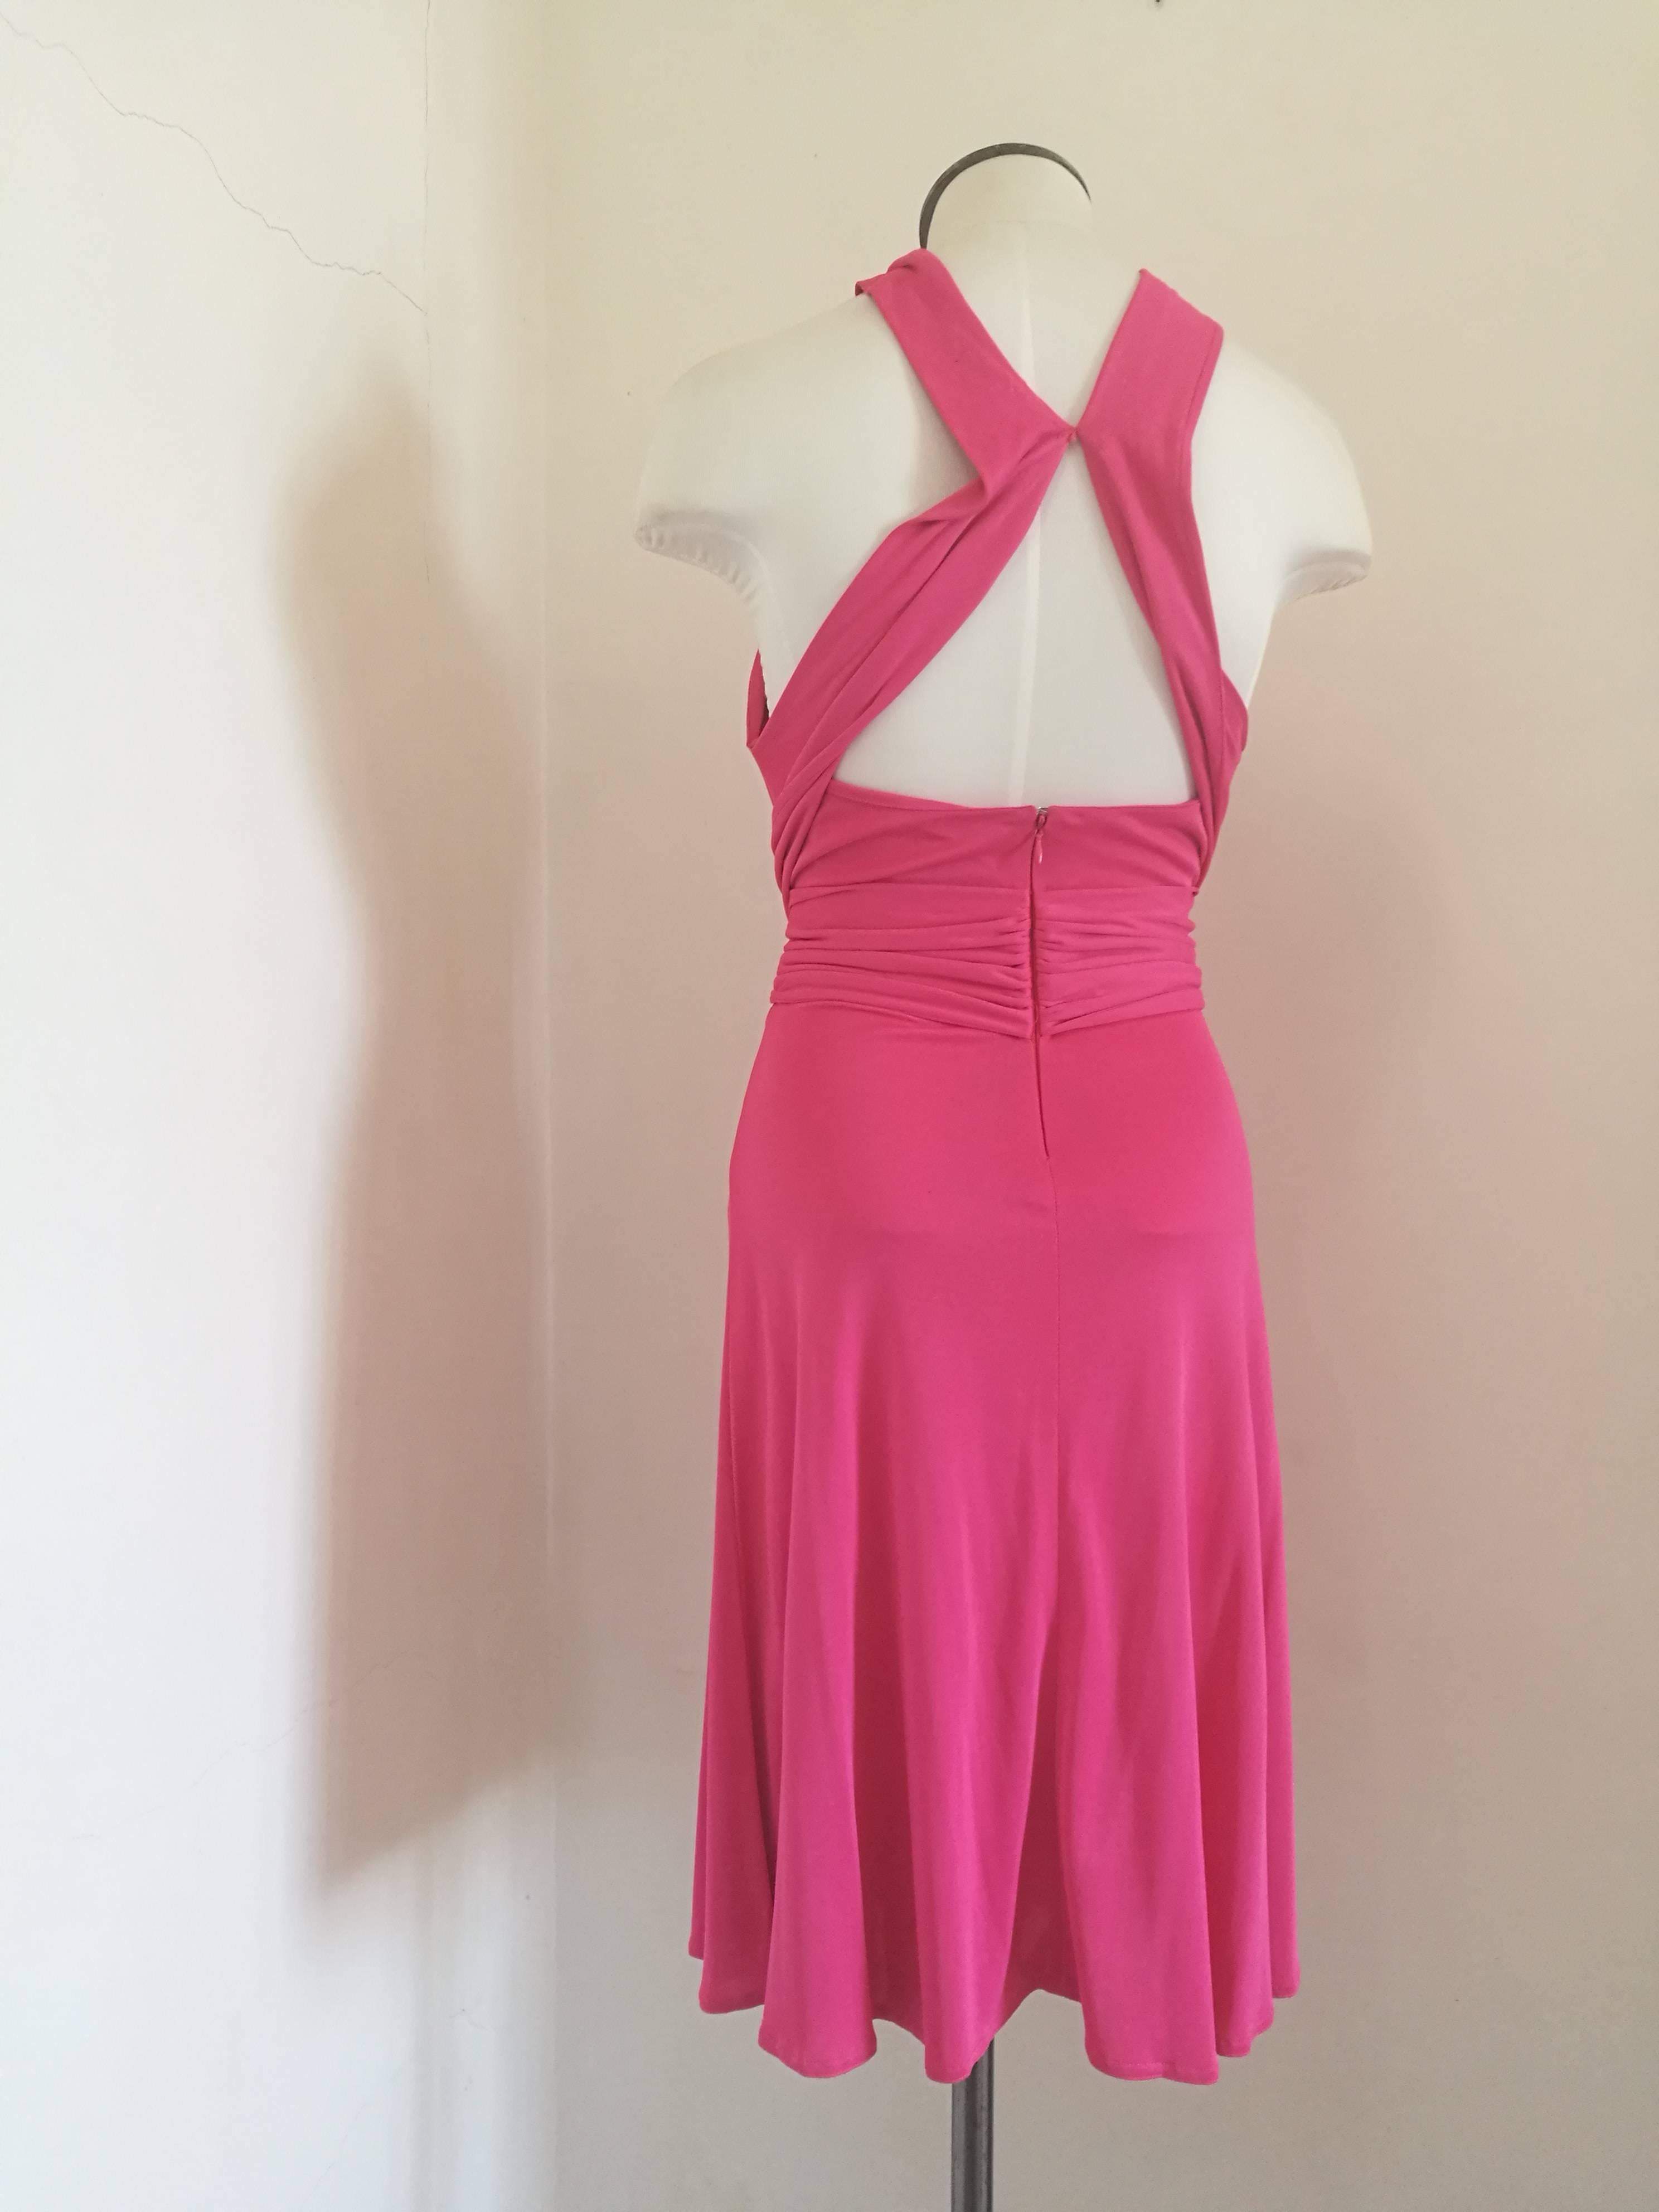 Versace Collection Pink Dress
Totally made in italy in size S